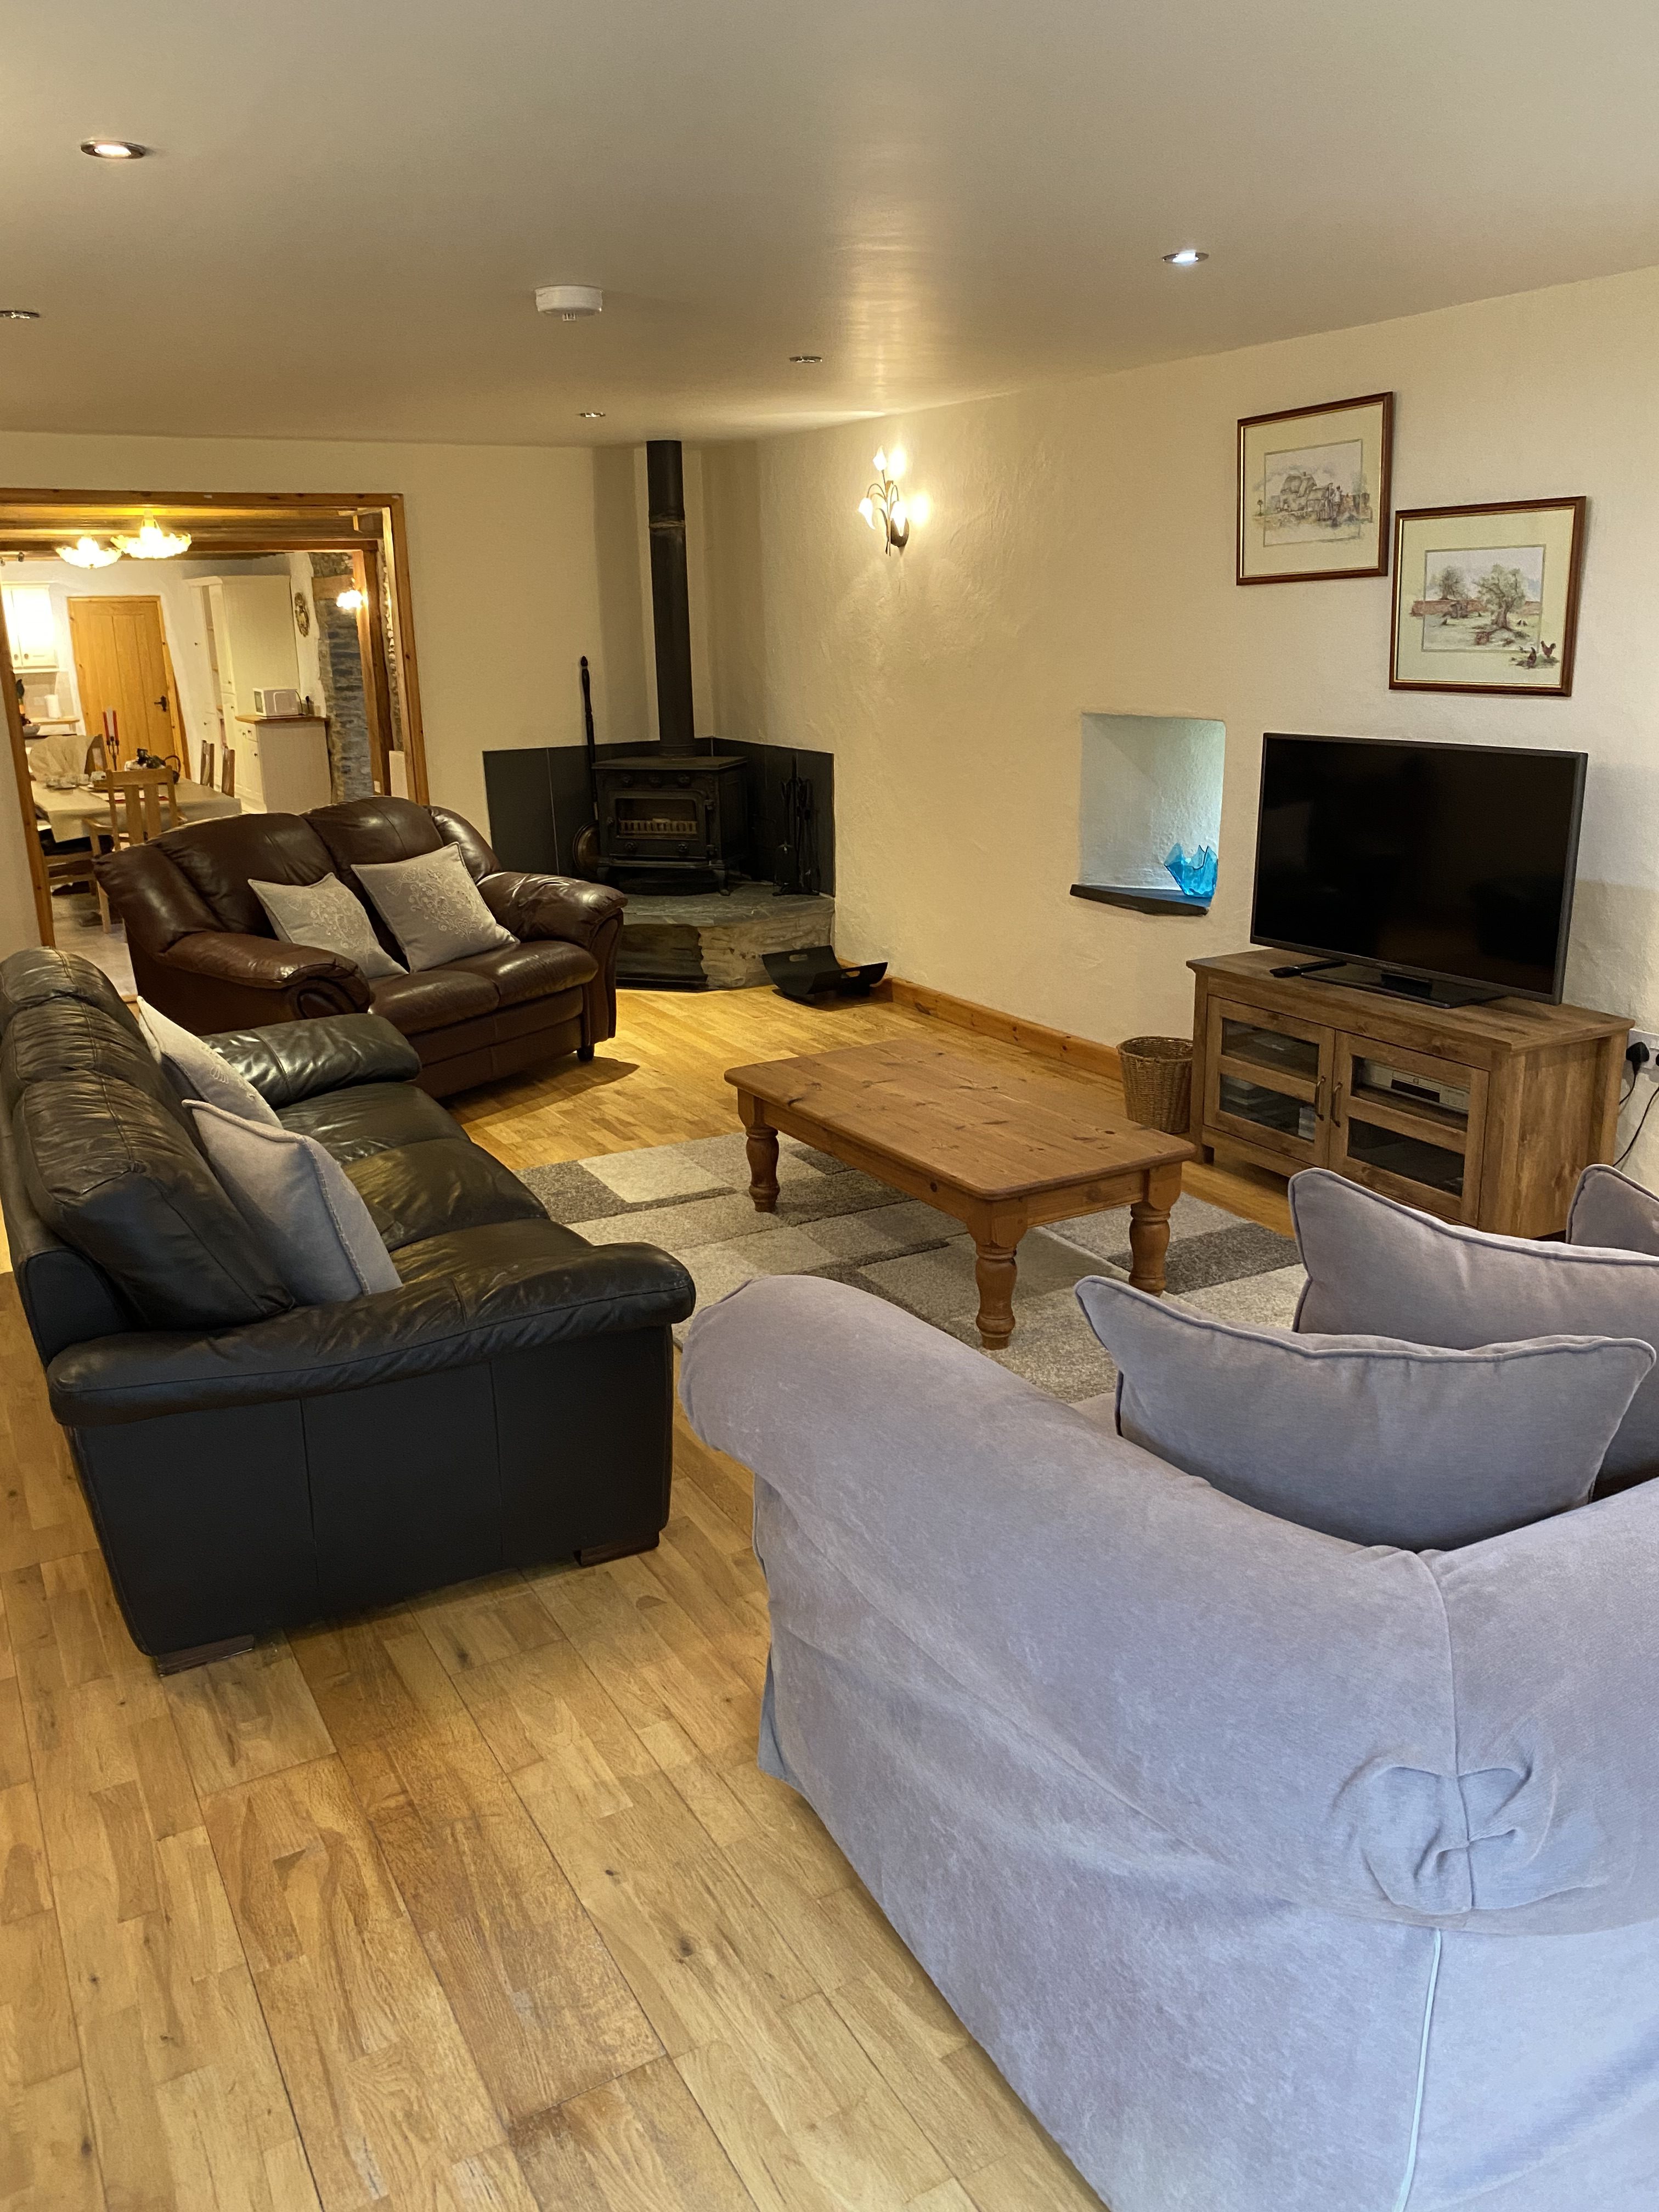 Cefn Du - cosy lounge with wood burner and TV